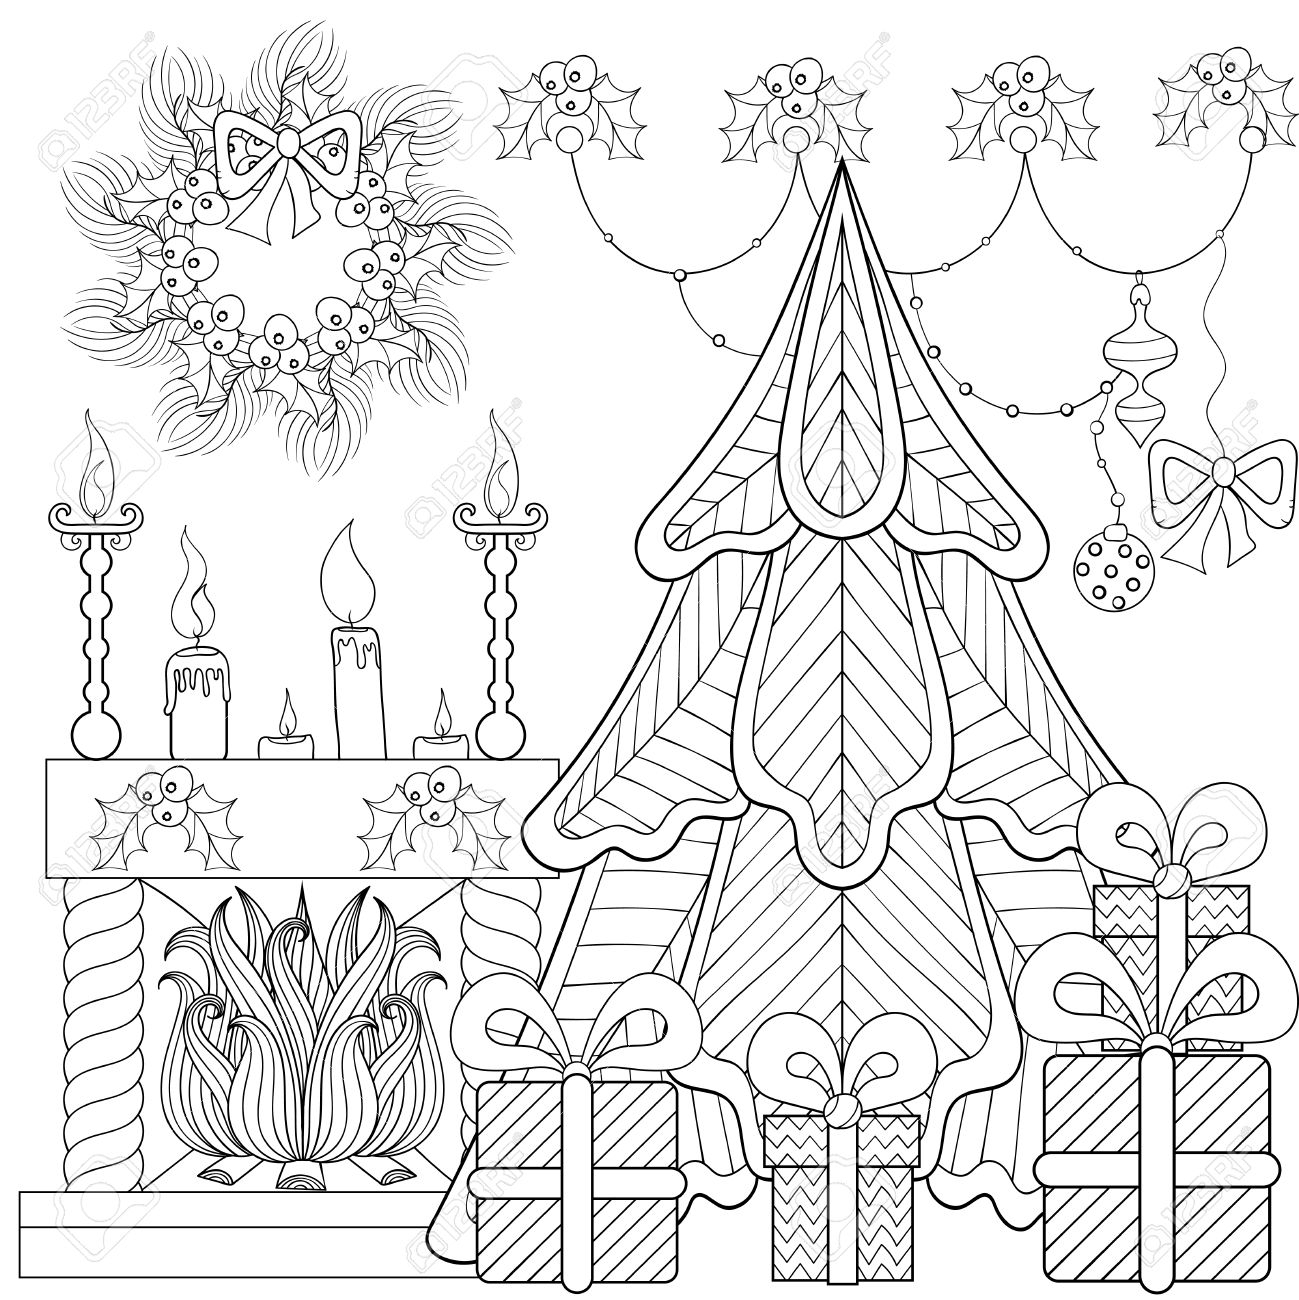 House Interior Coloring Pages at GetDrawings.com | Free for personal